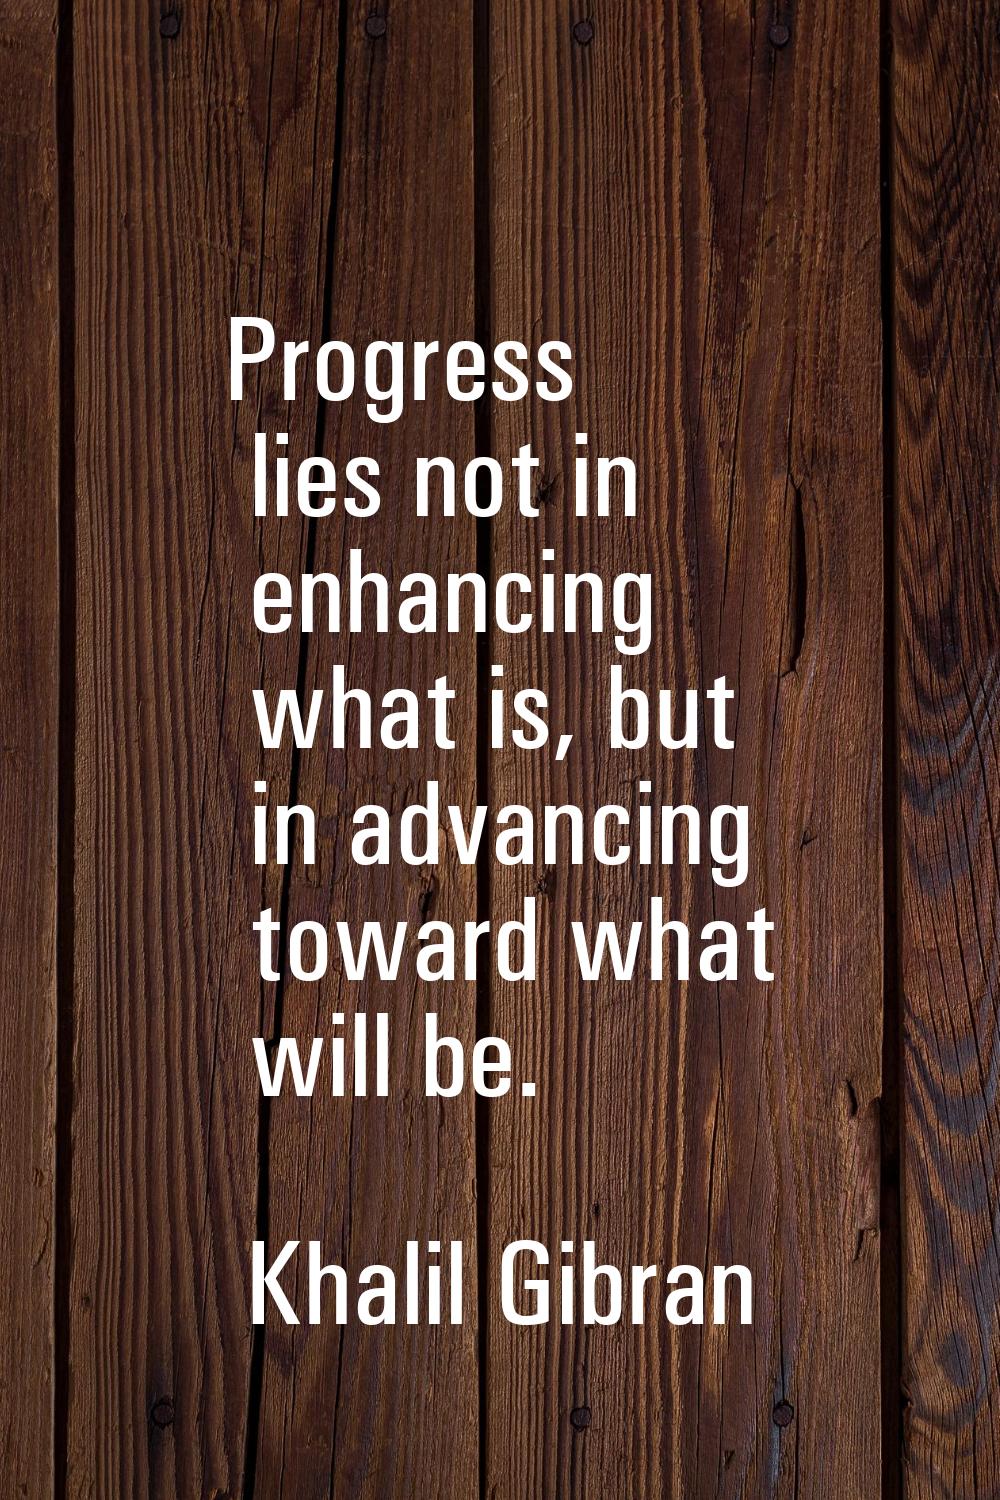 Progress lies not in enhancing what is, but in advancing toward what will be.